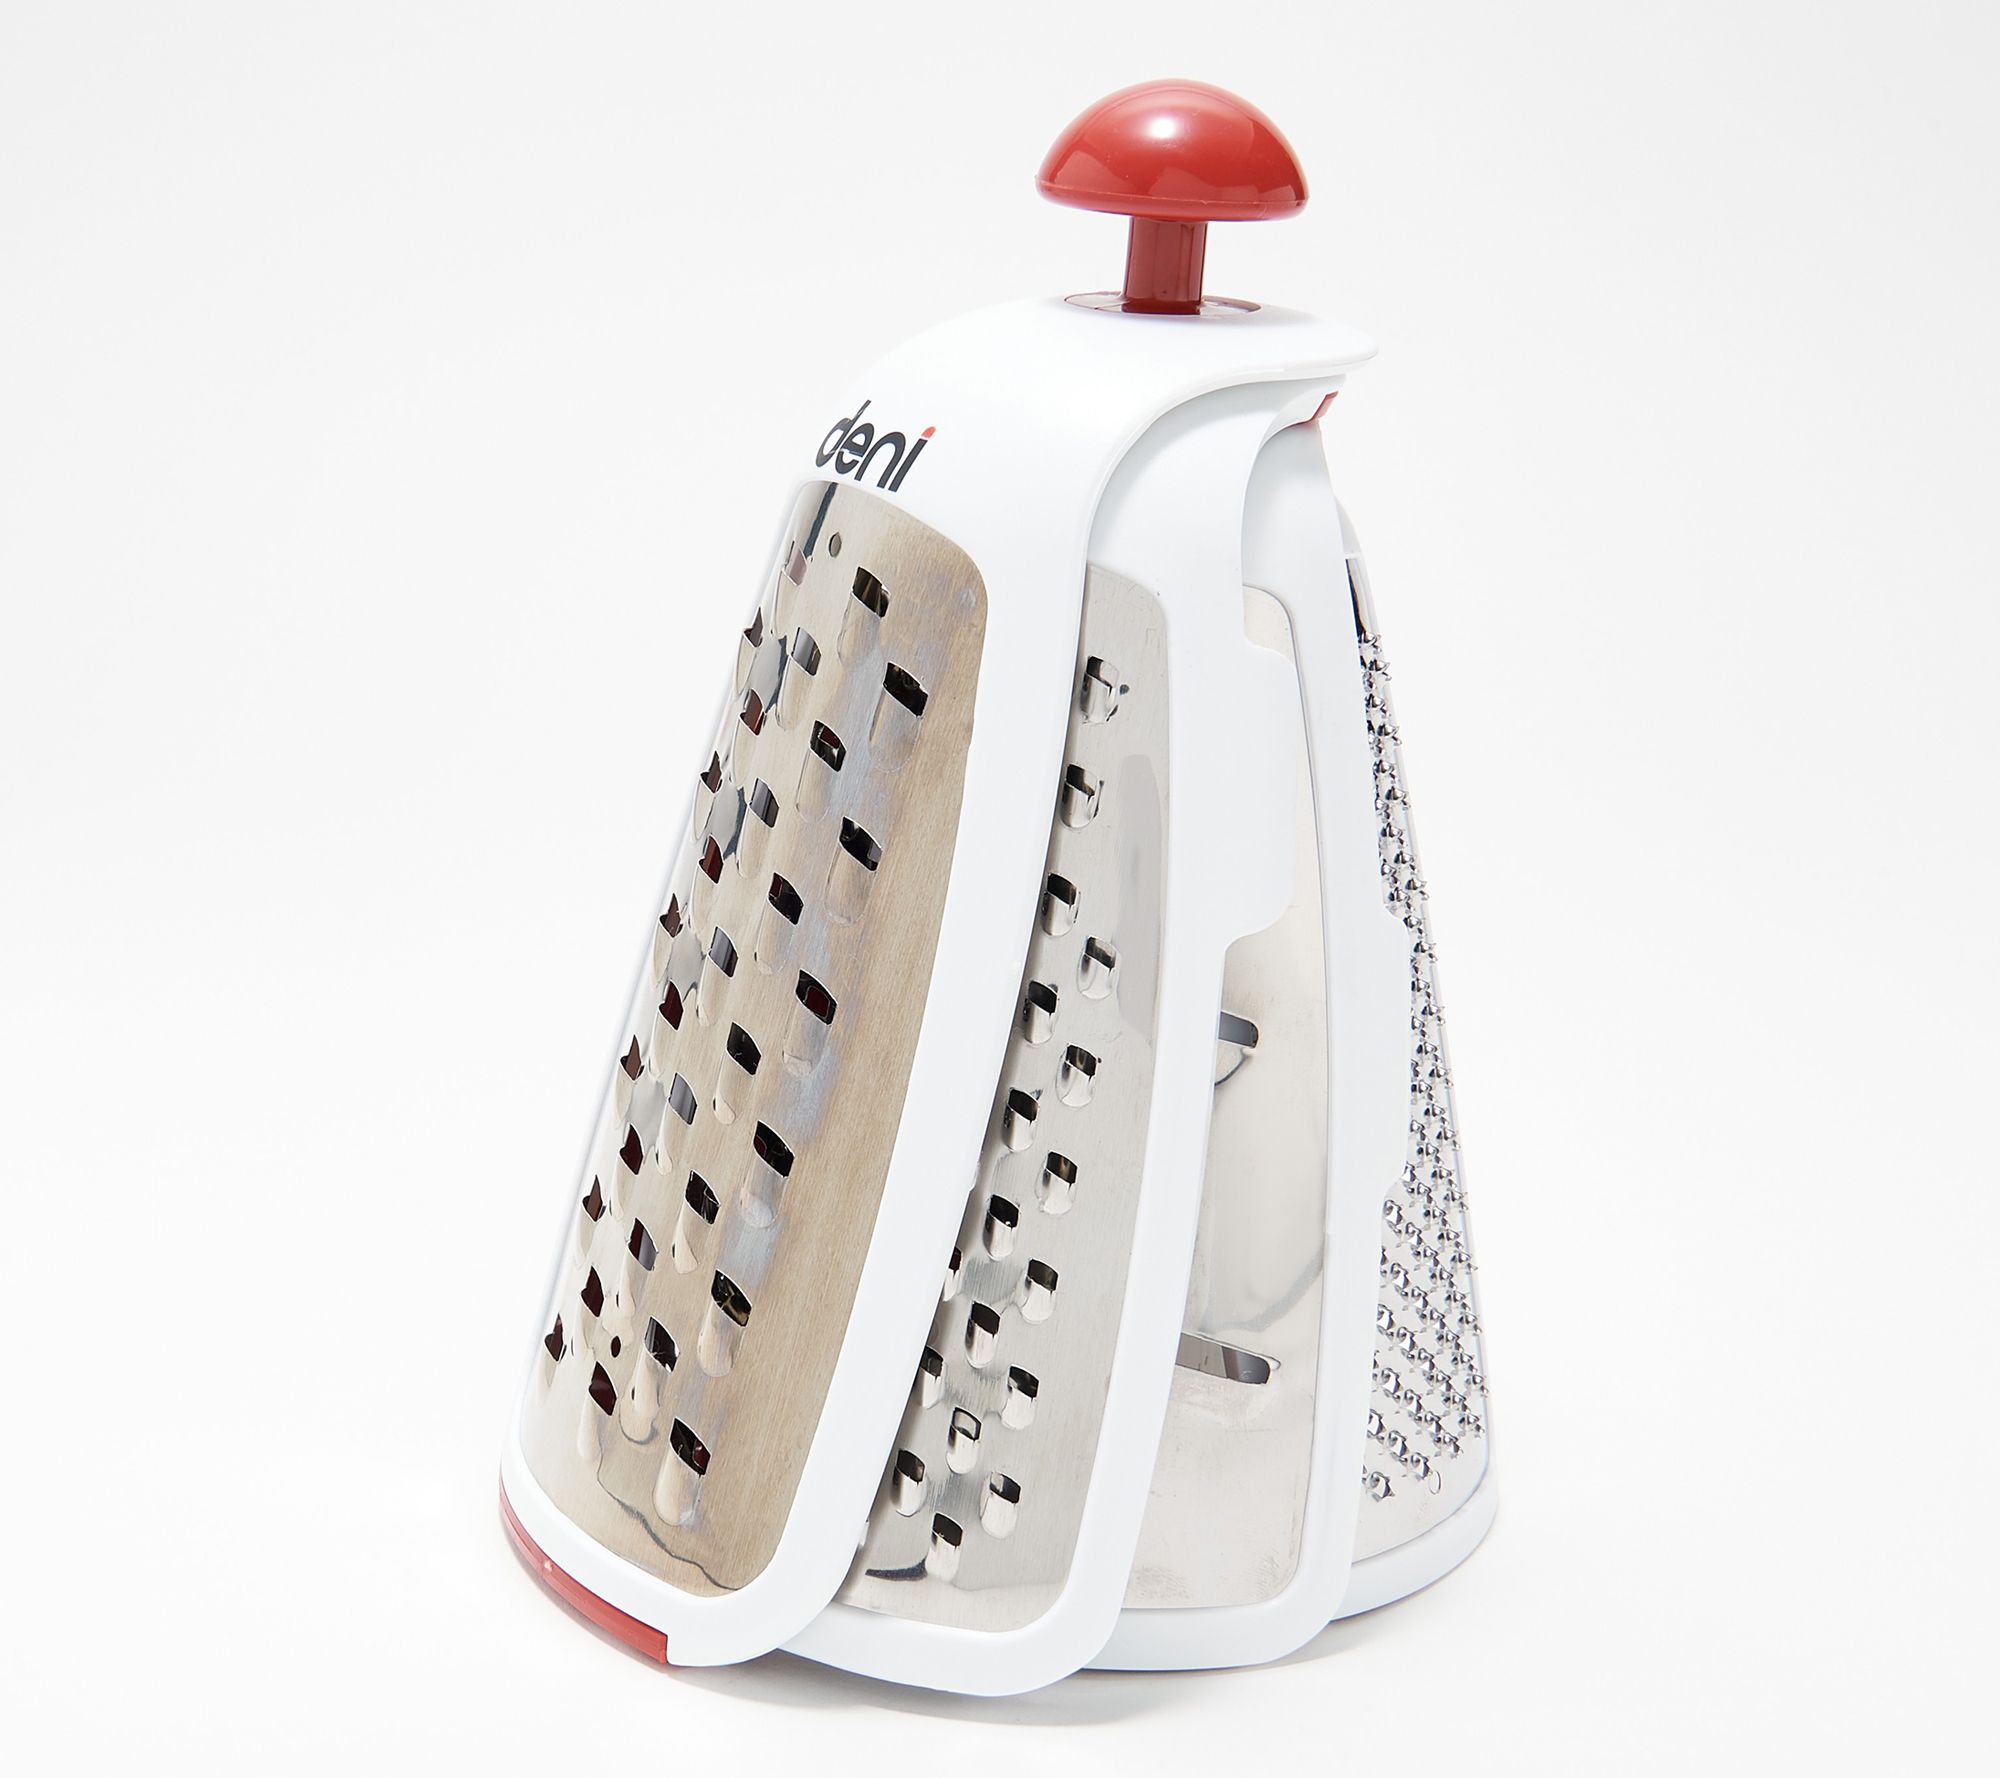 Prepology Handheld Electric Rechargeable Cheese Grater 